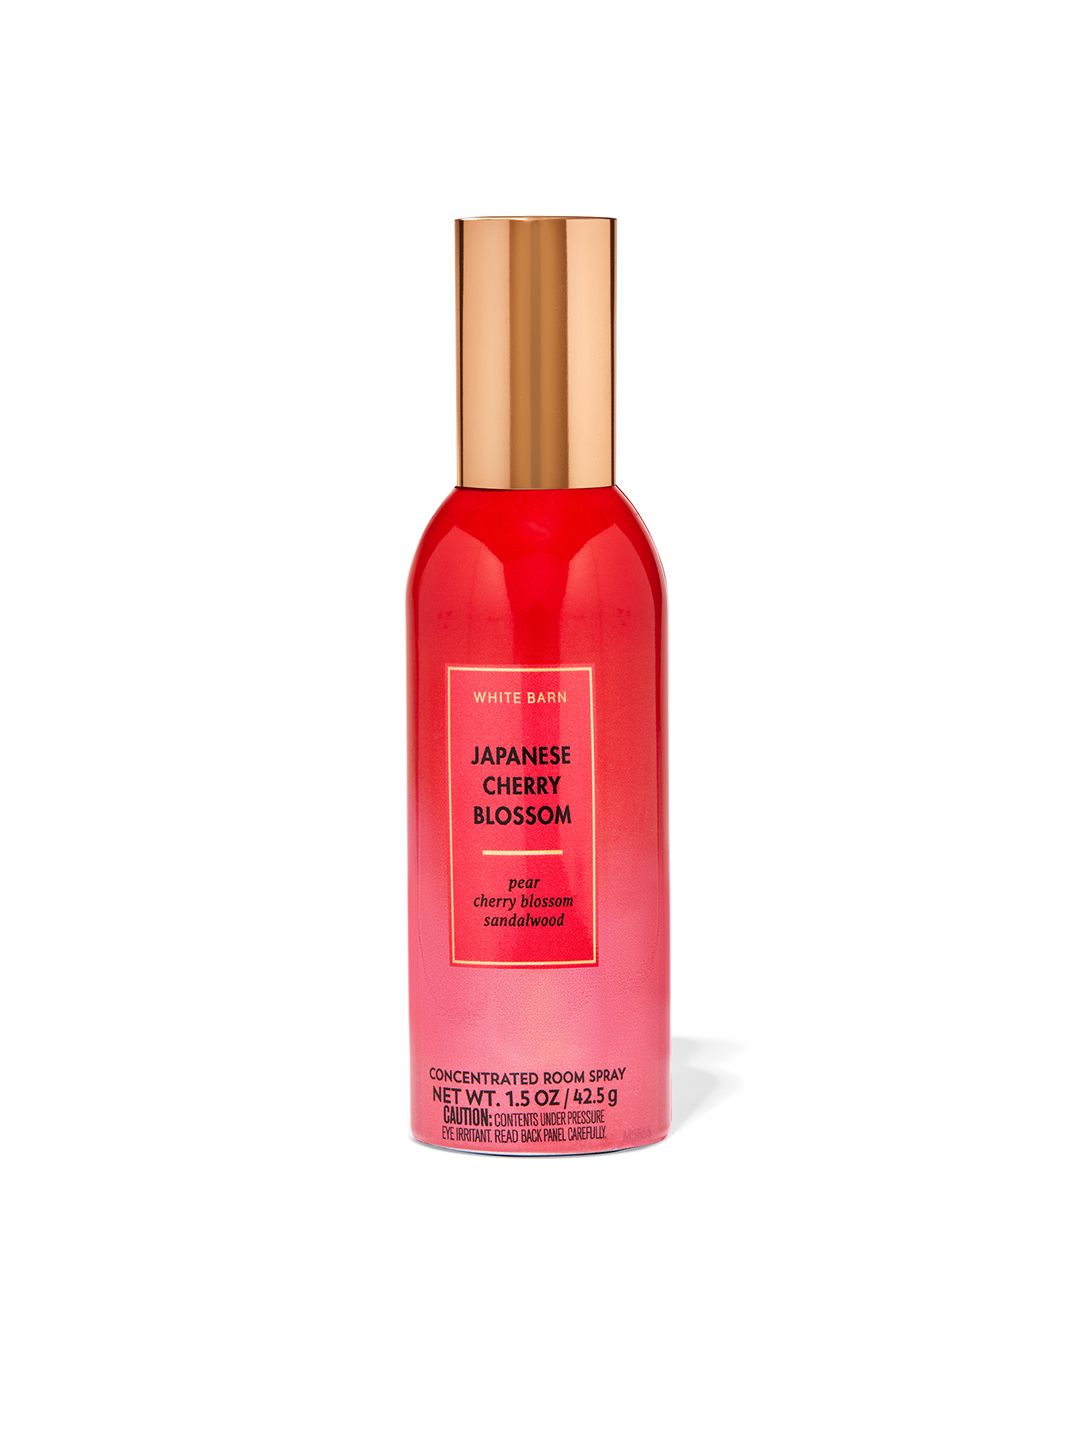 Bath & Body Works Japanese Cherry Blossom Concentrated Room Spray - 42.5 g Price in India